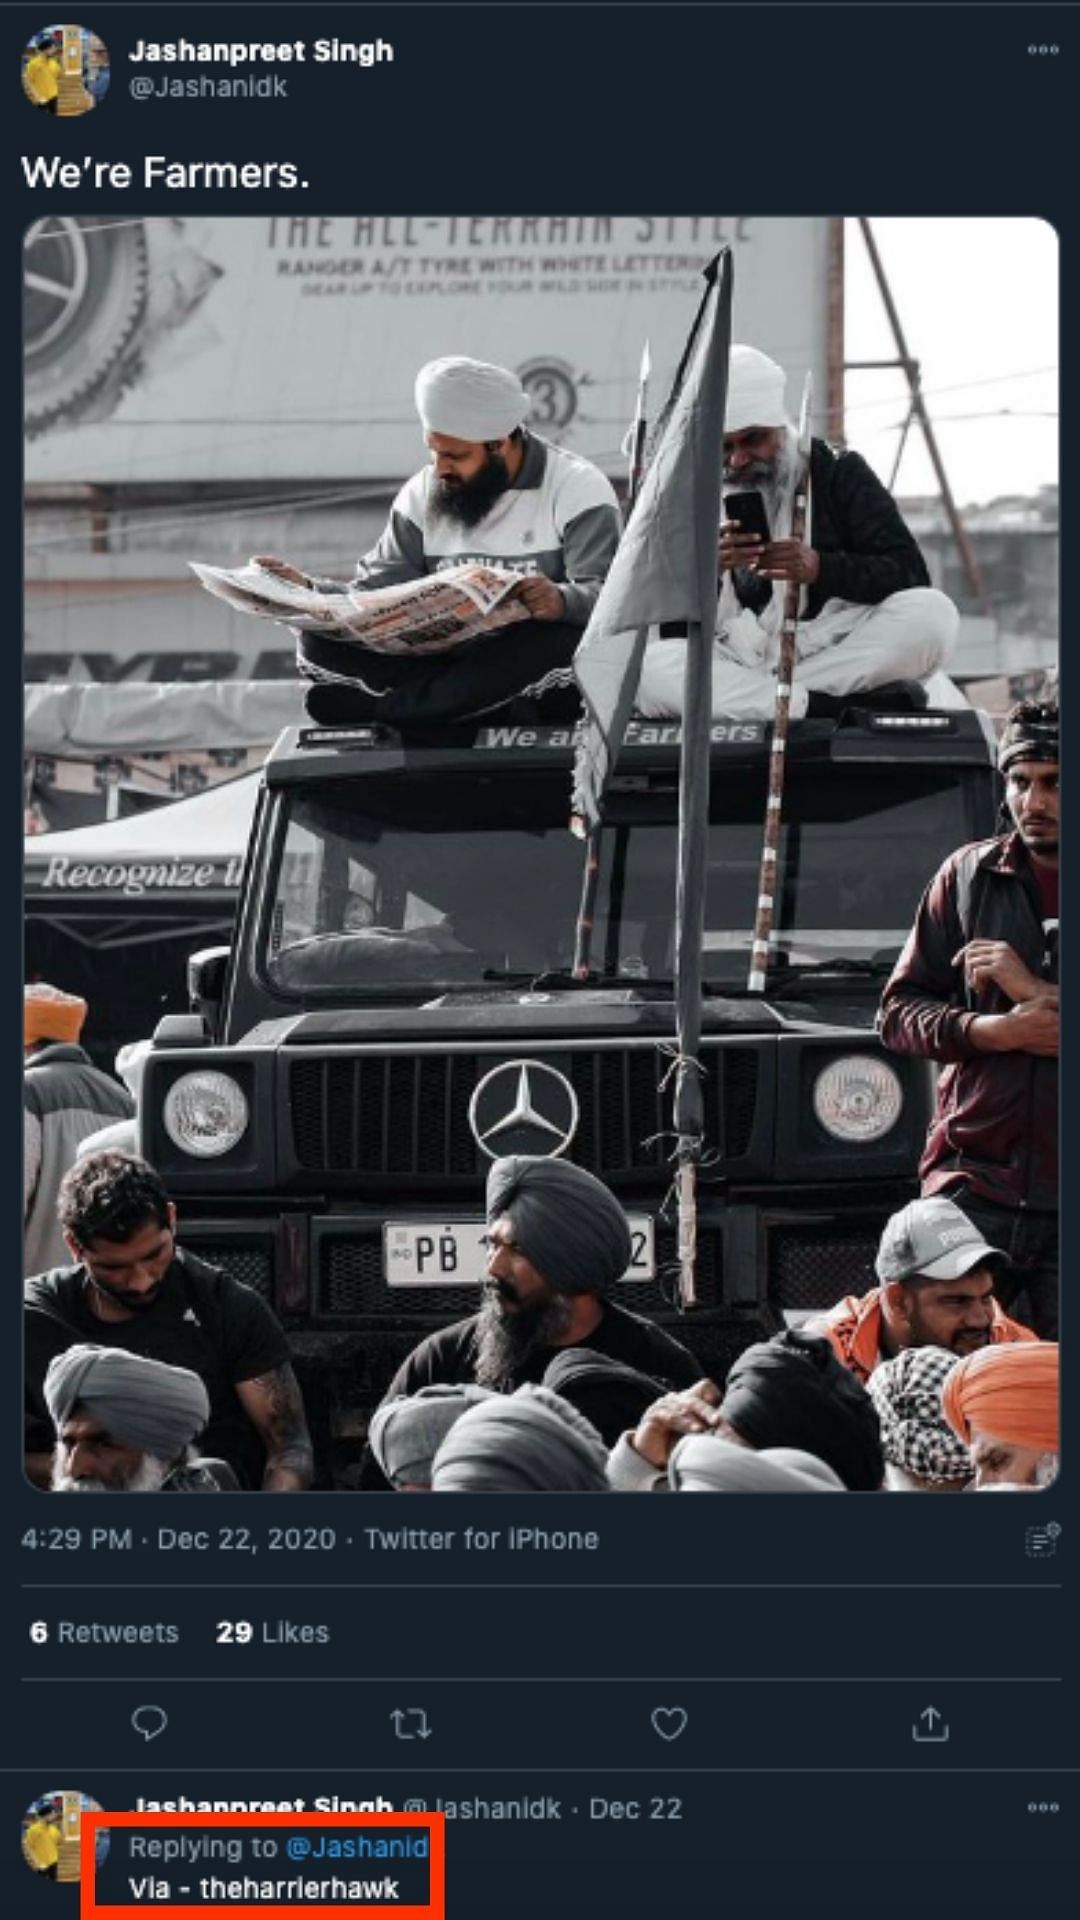 The car seen in the aforementioned image is a modified Gurkha by Force Motors which costs around Rs 10 Lakh.